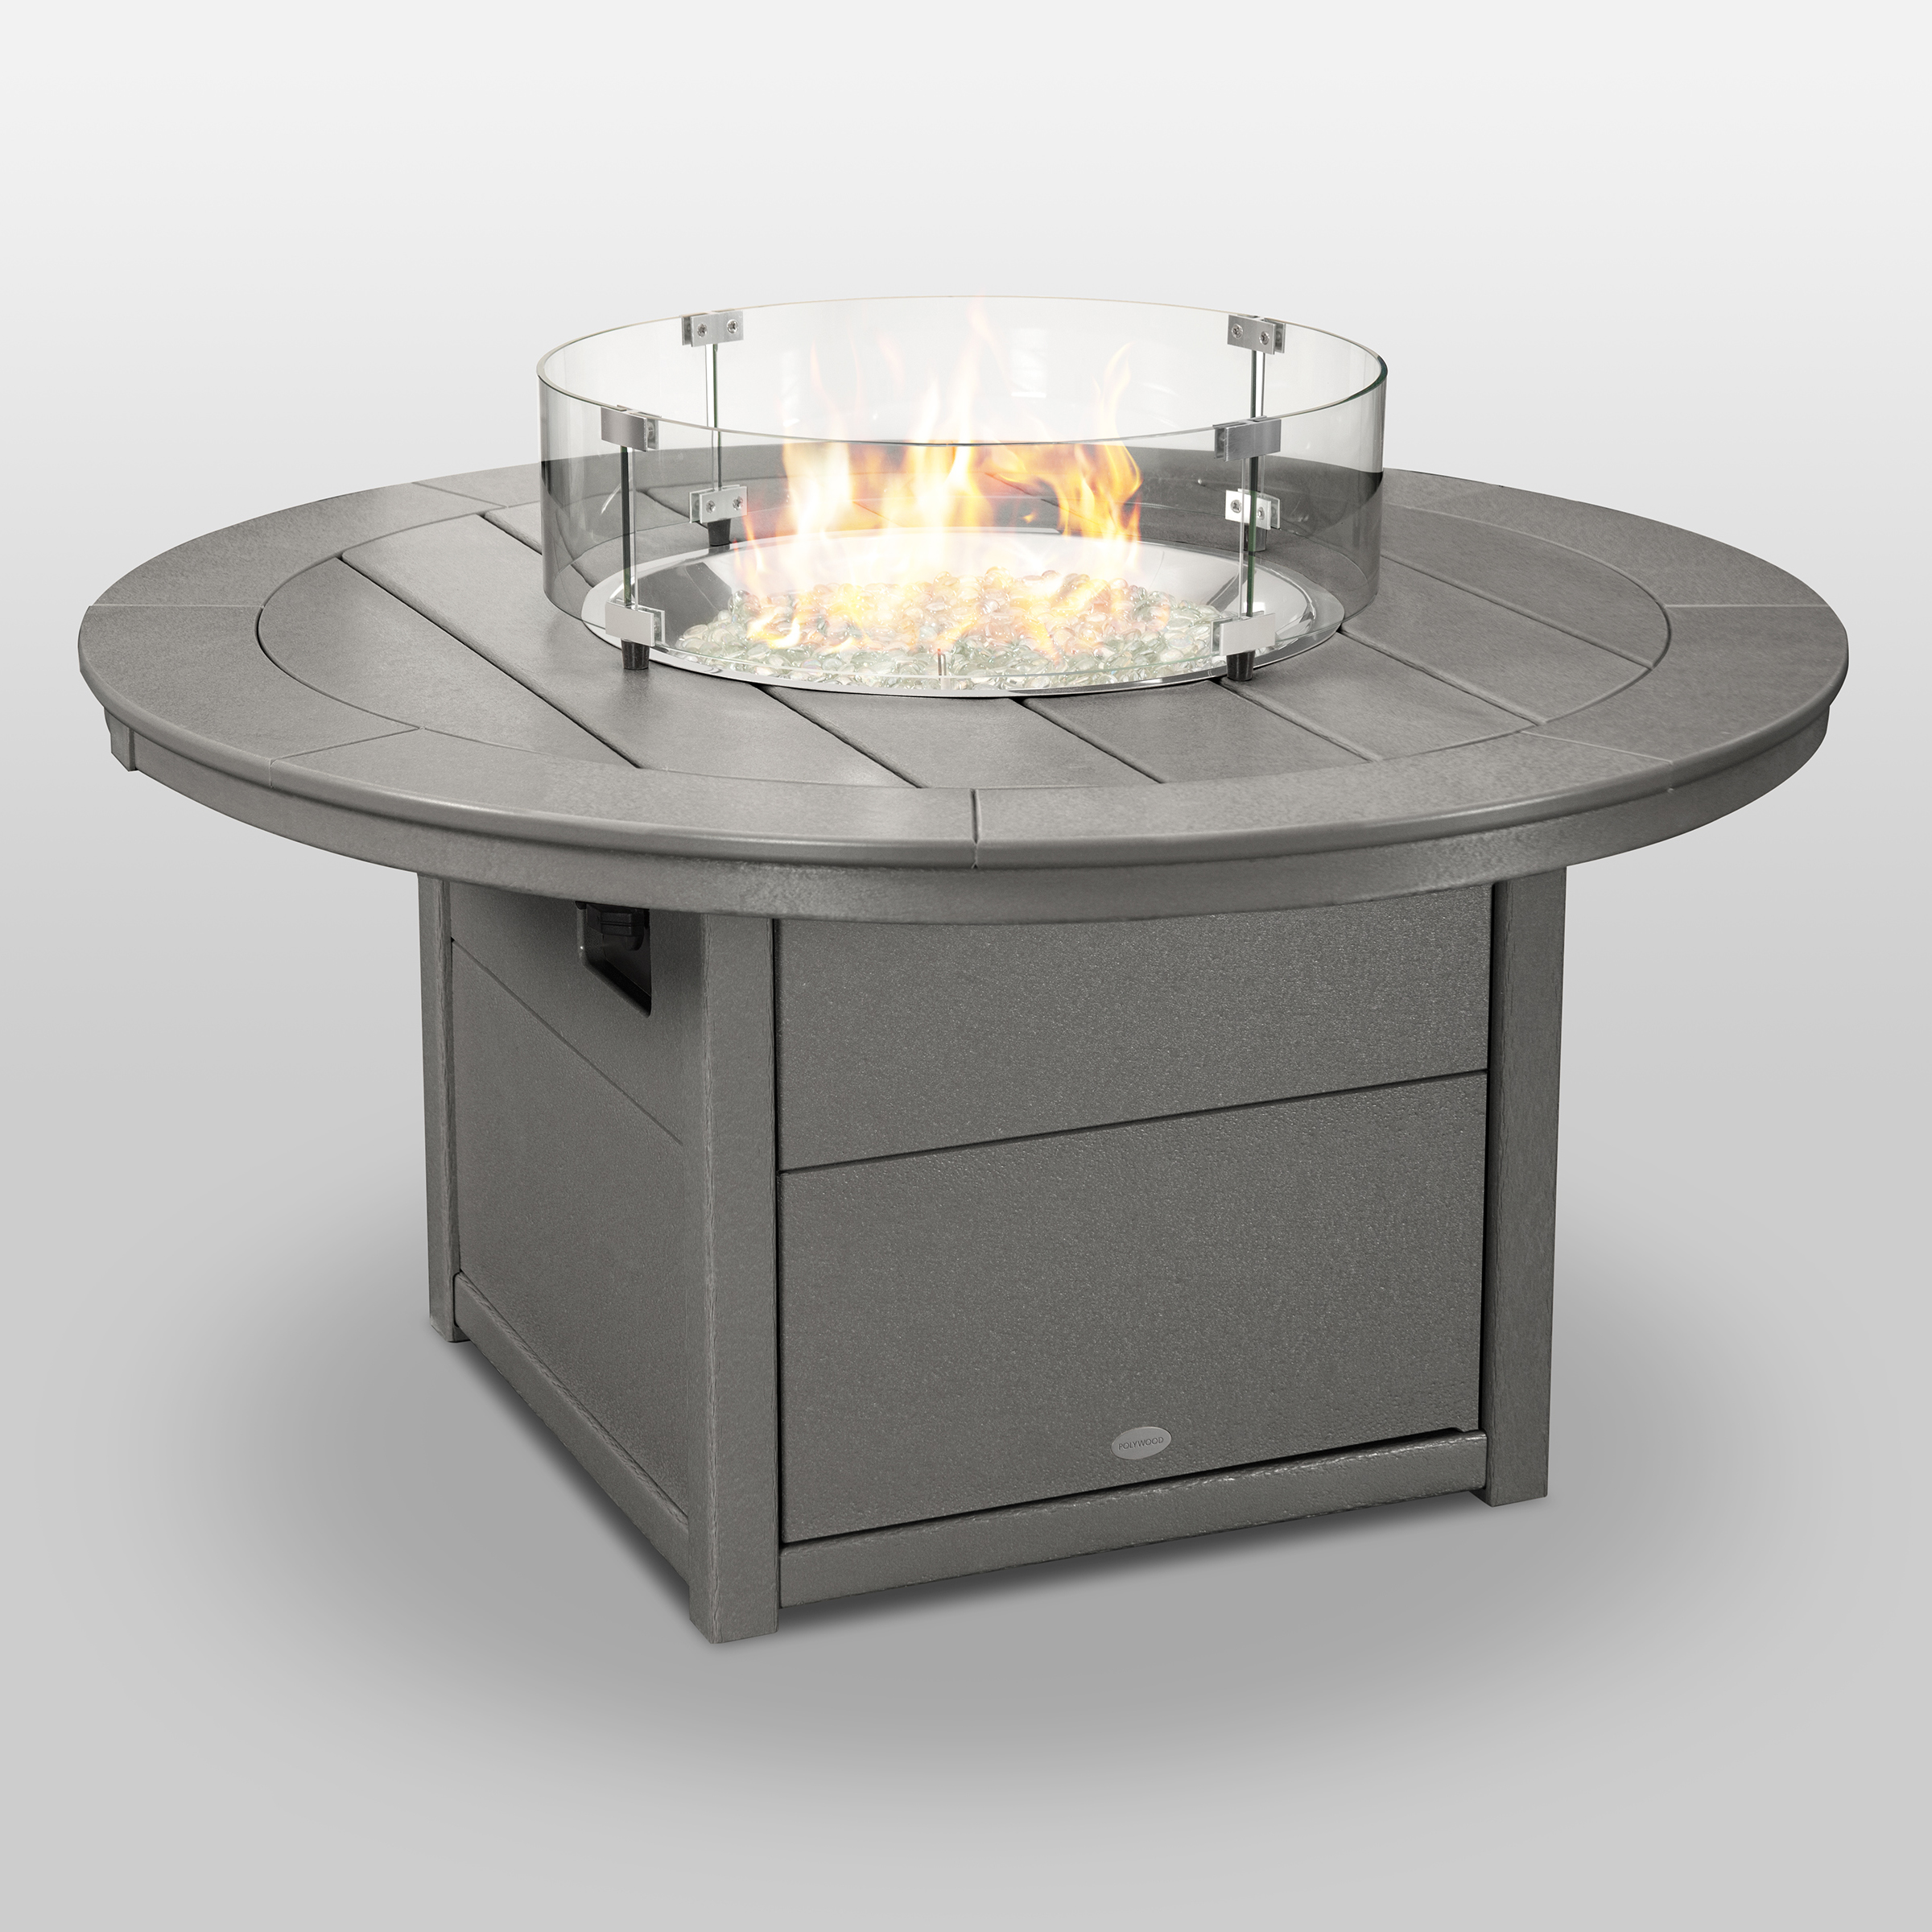 round 48 inch fire pit table in slate grey thumbnail image